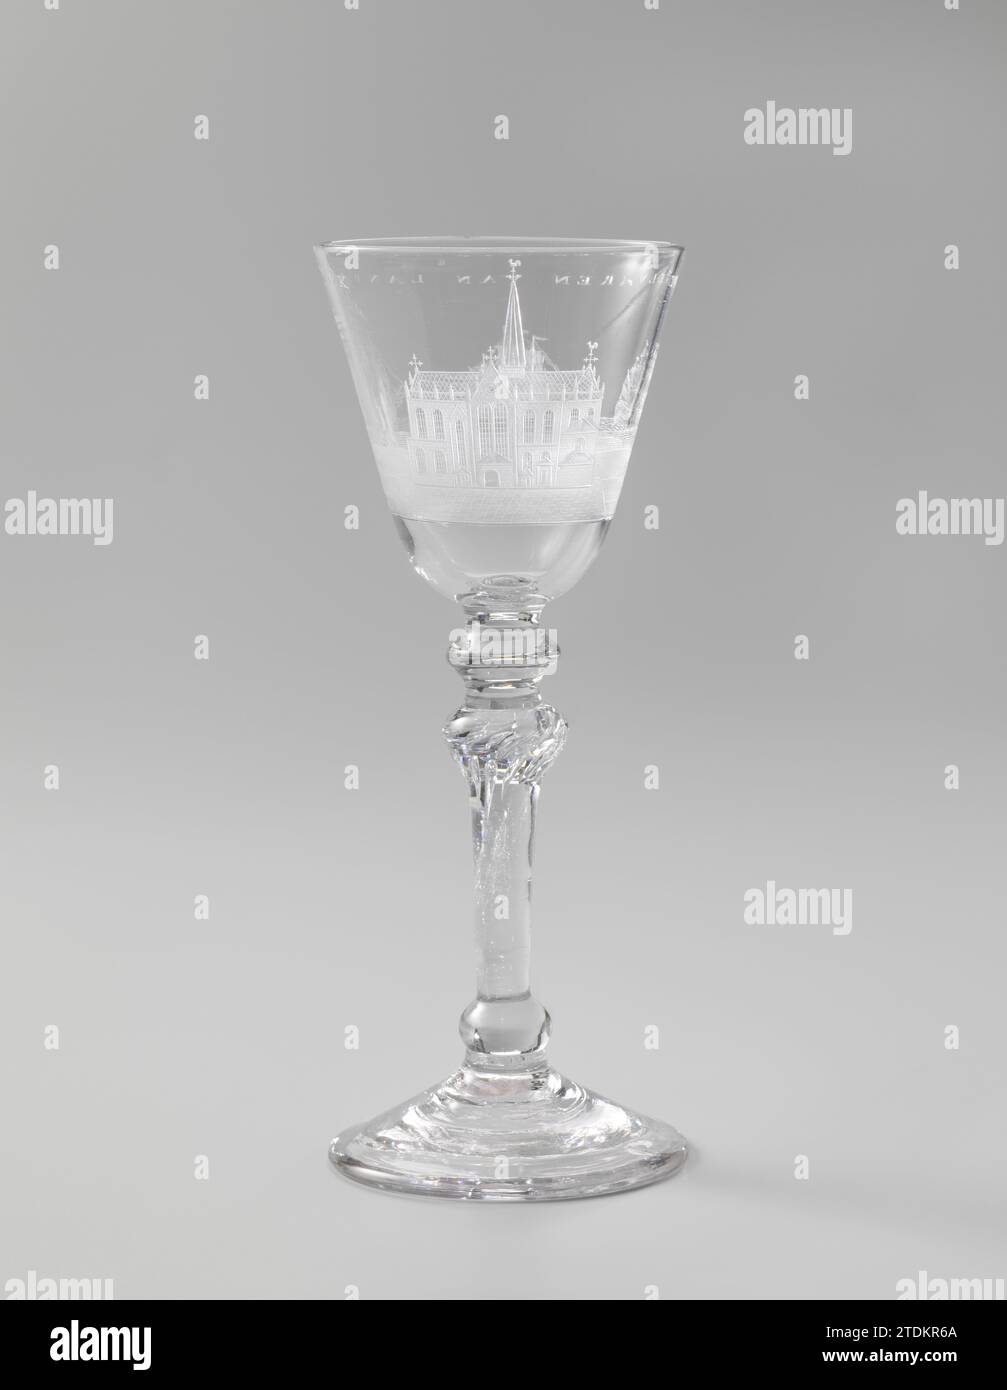 Jacob Sang, originally from Erfurt, was the most important glass